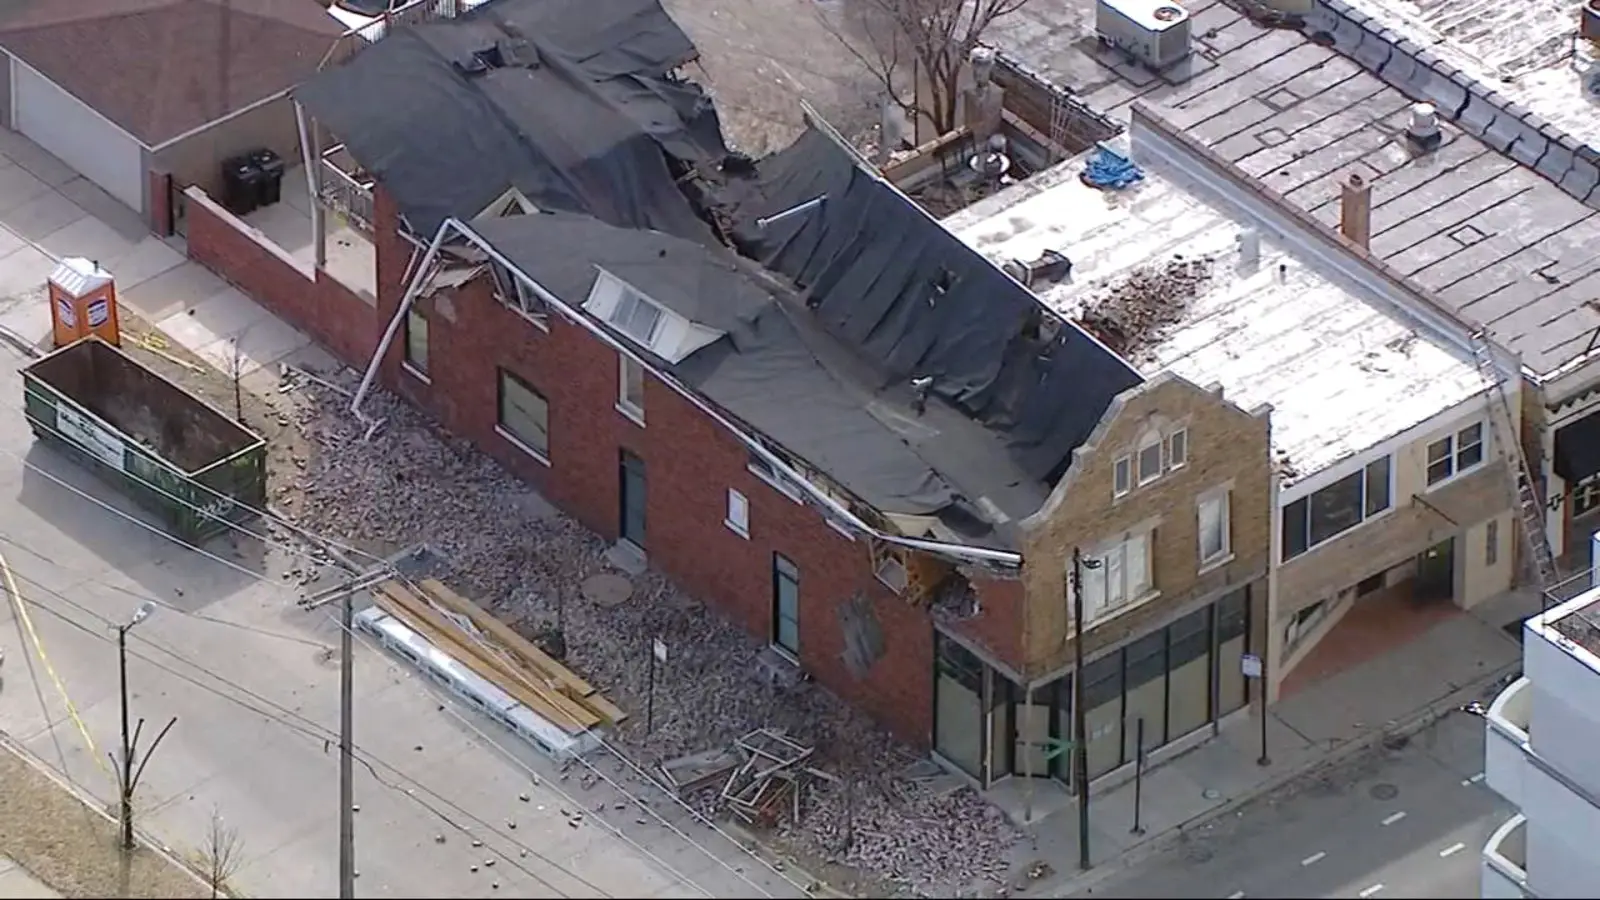 Roof collapses on building under renovation in Chicago